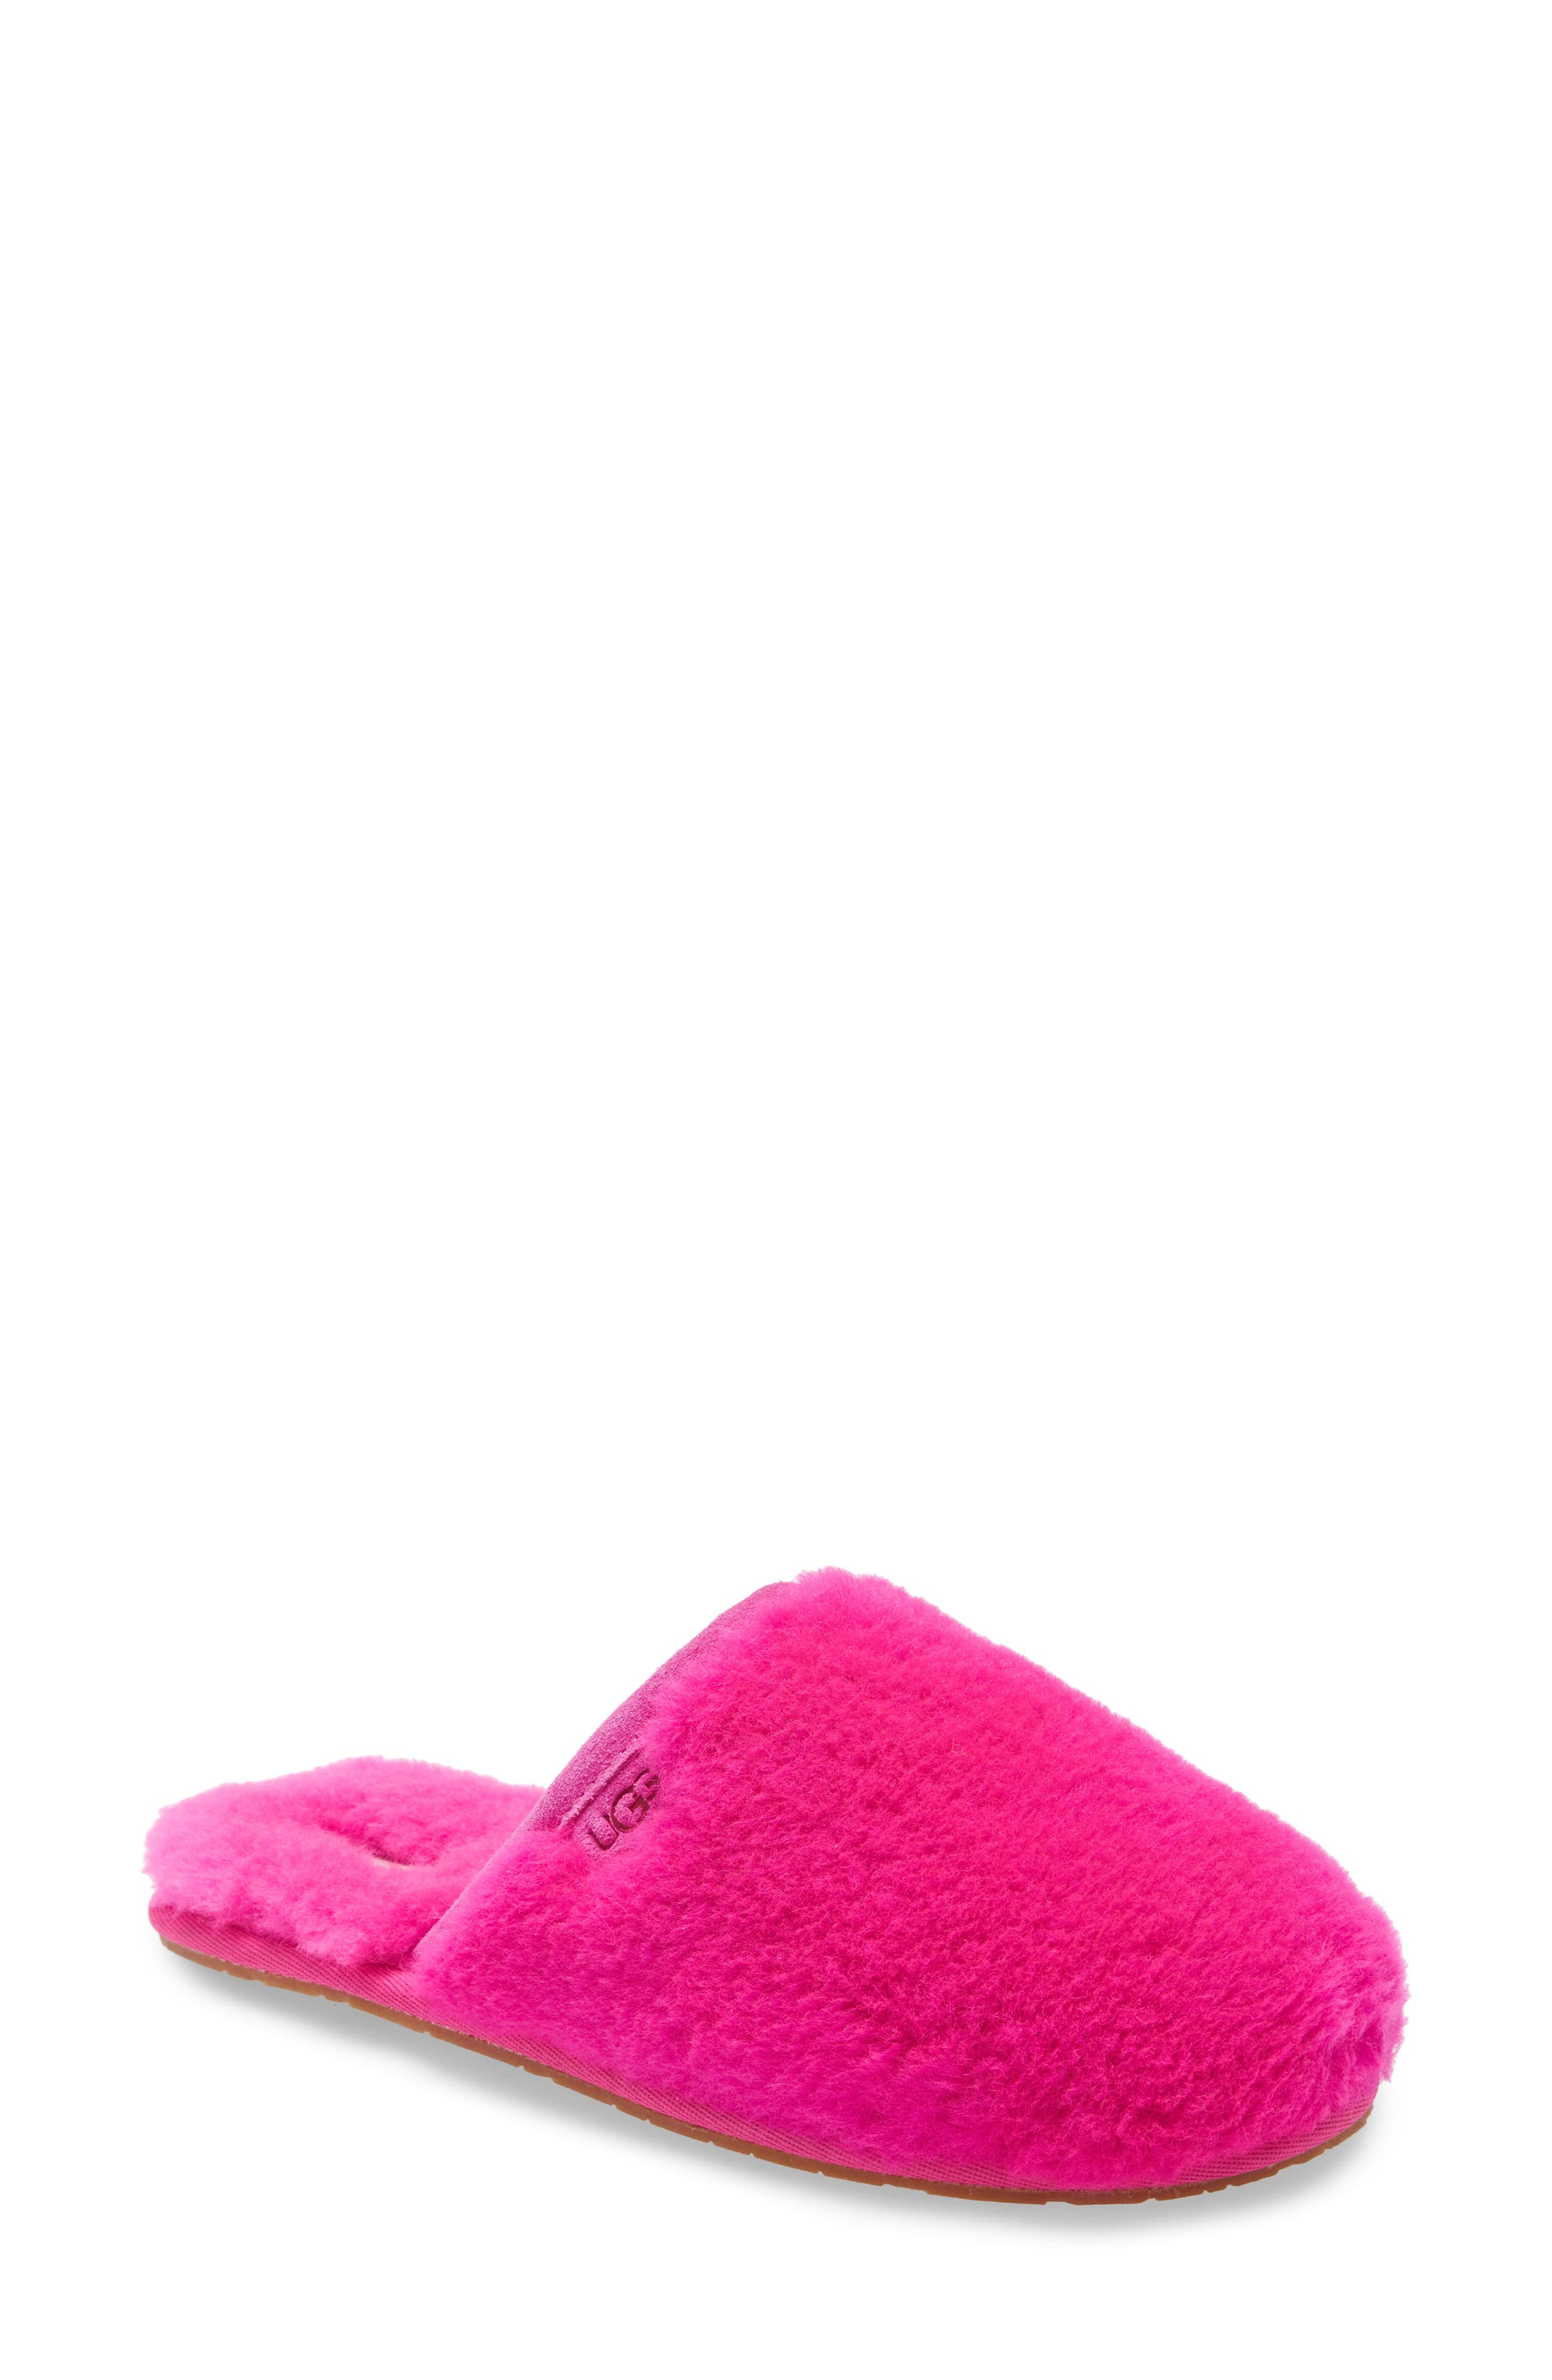 ugg pink slippers